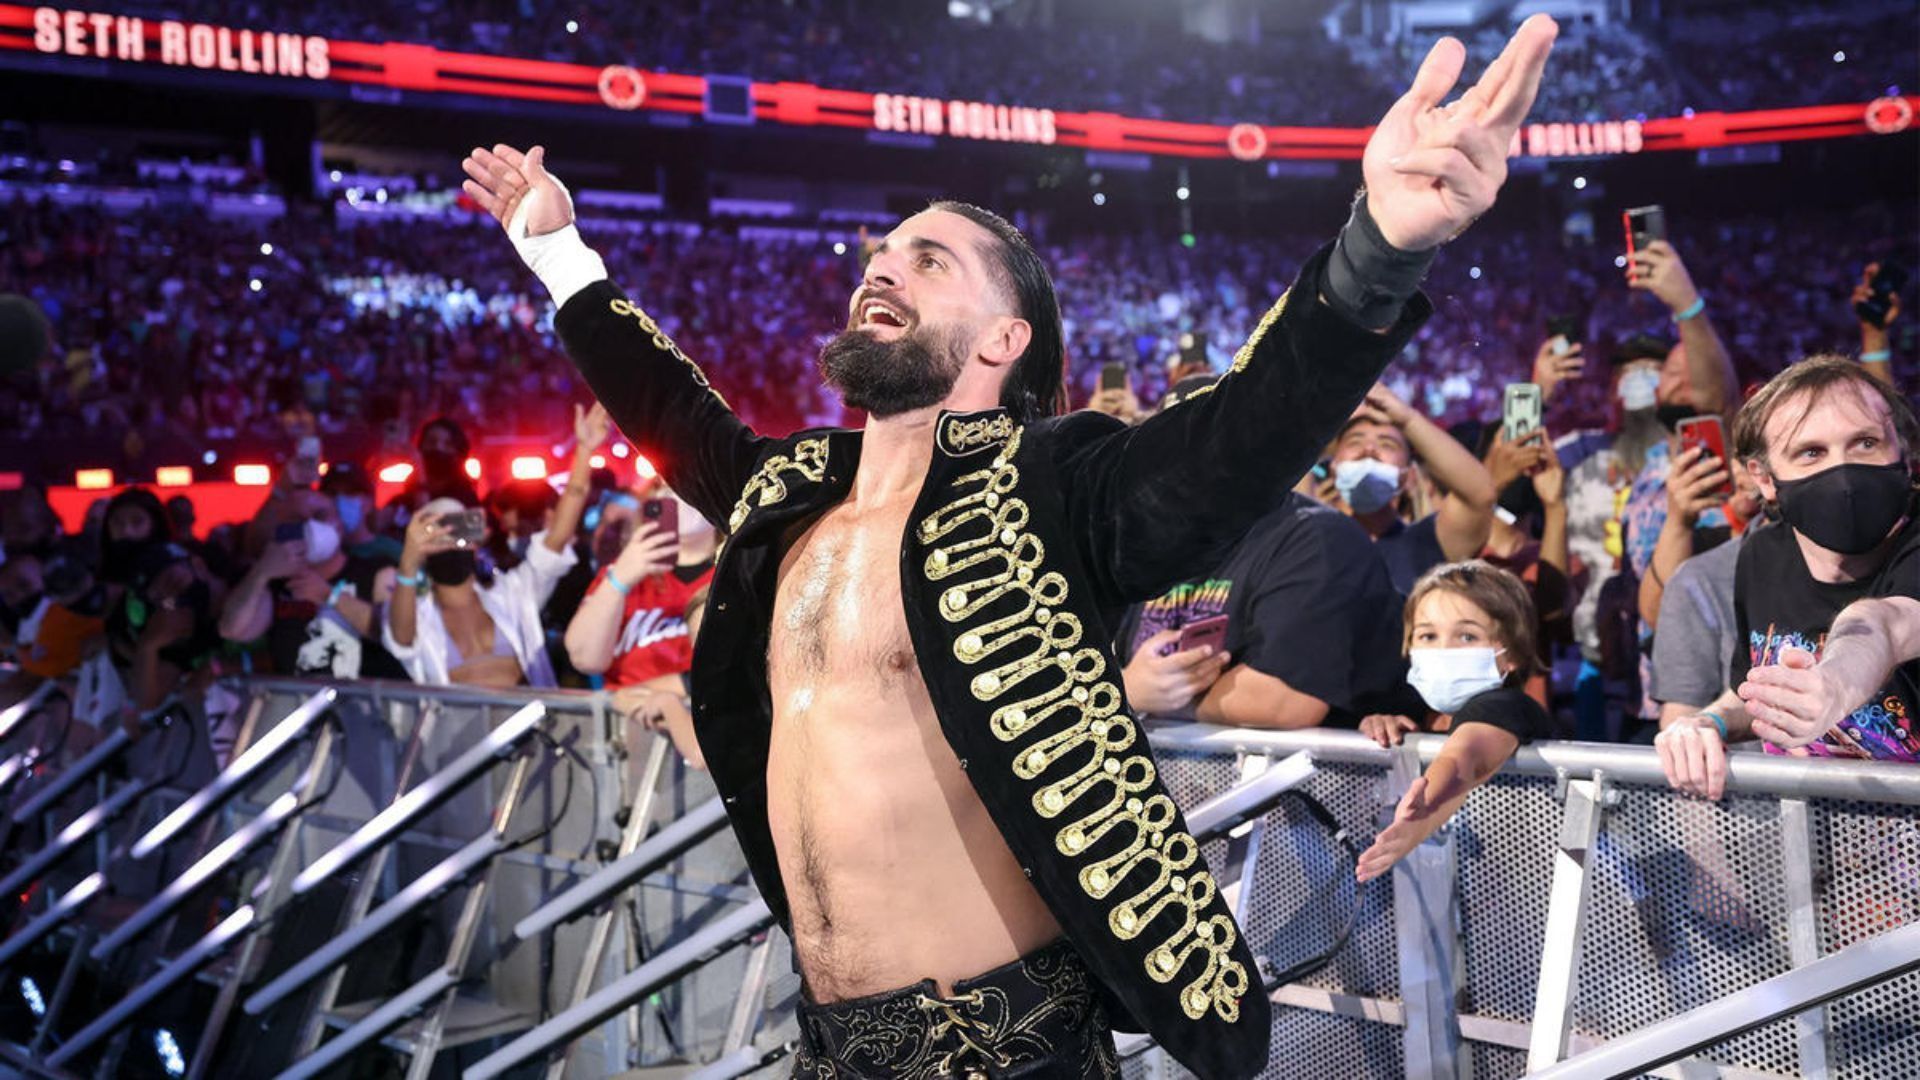 Seth Rollins recently had an injury scare on RAW